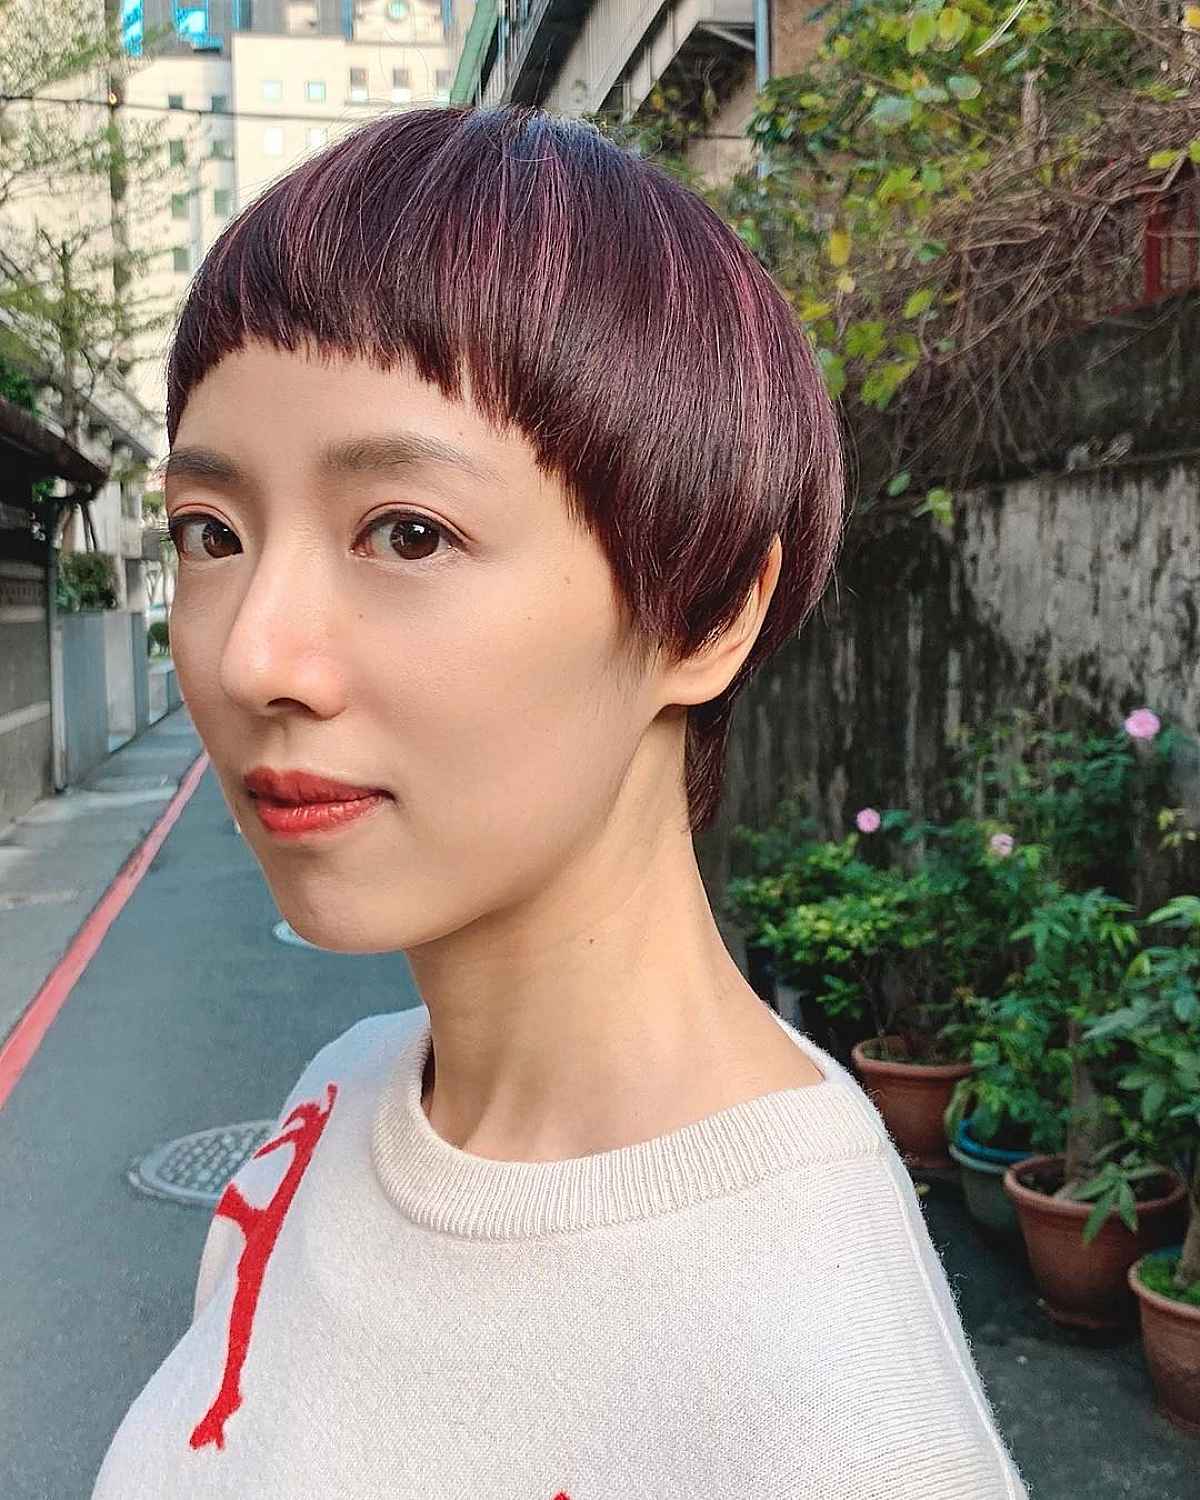 Straight Pixie Cut with Short Bangs